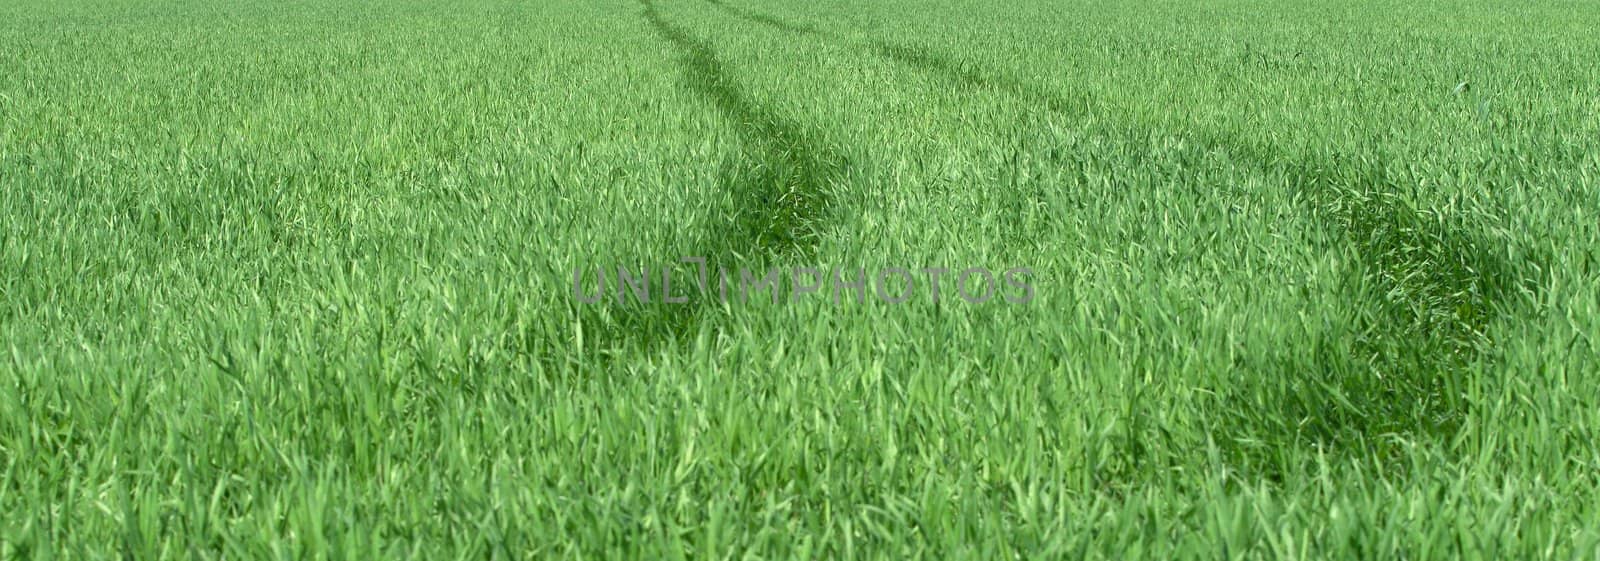 road in grass